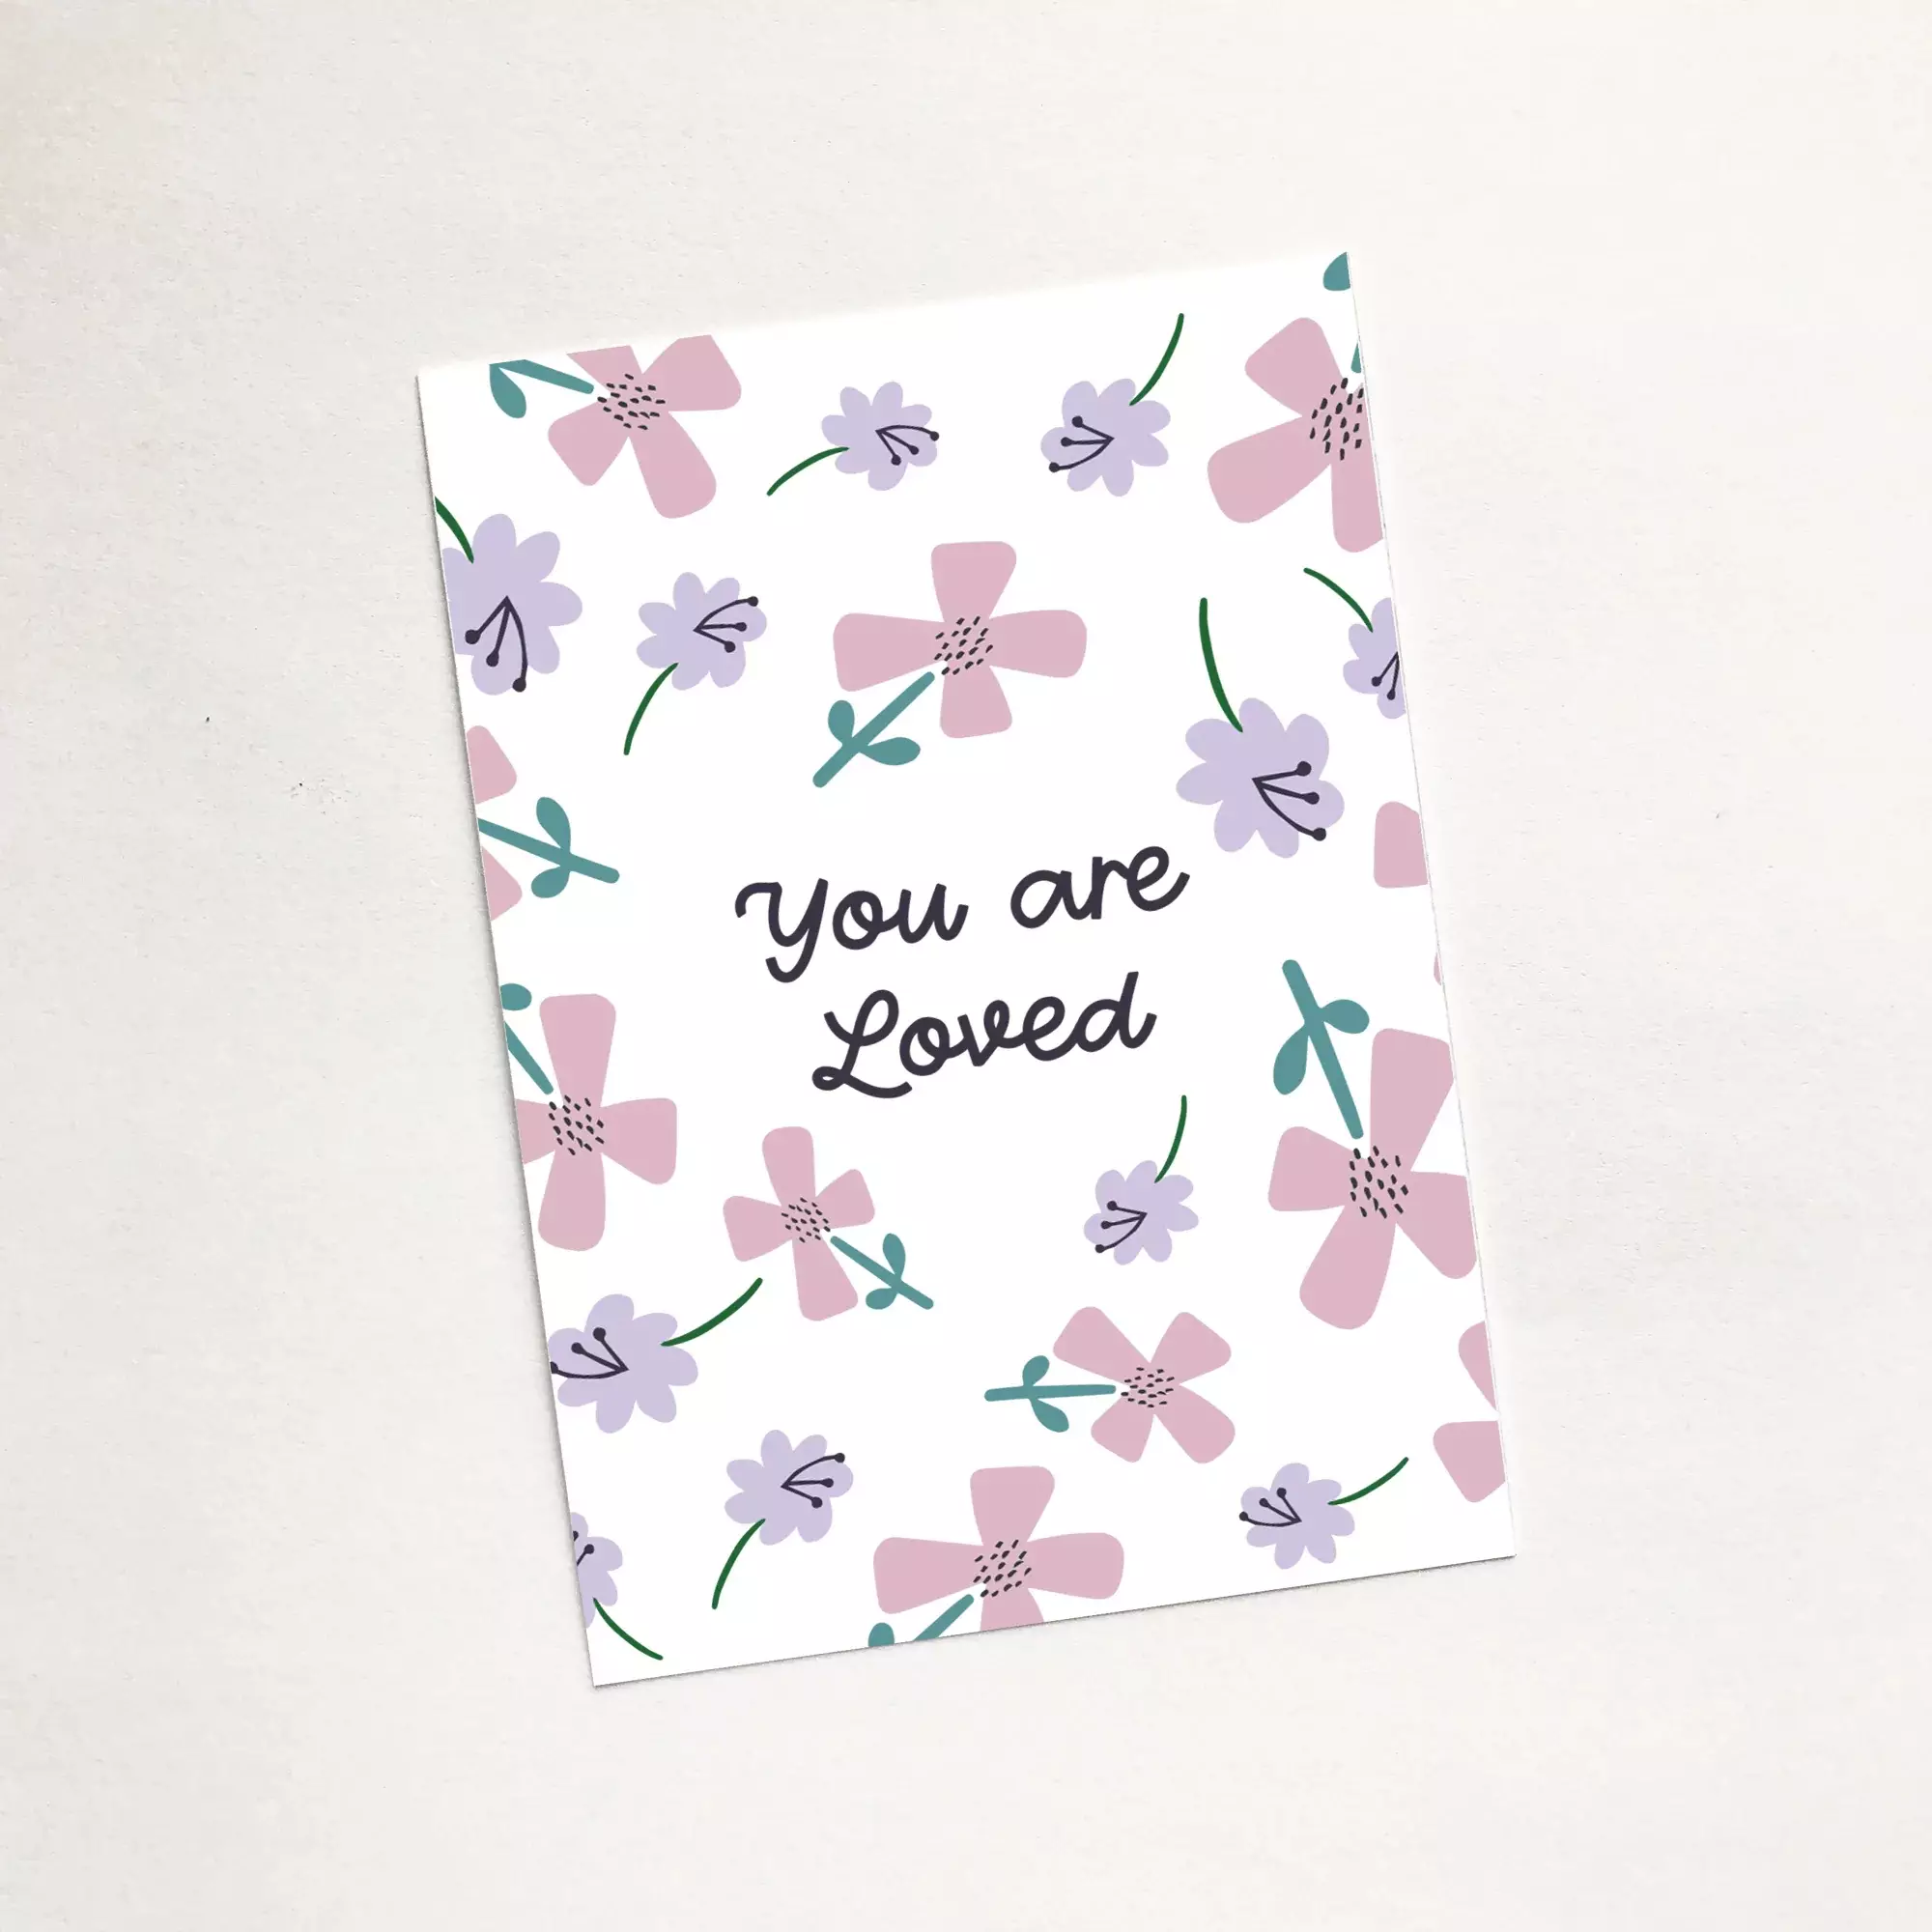 'You are Loved' (Petals) Mini Card